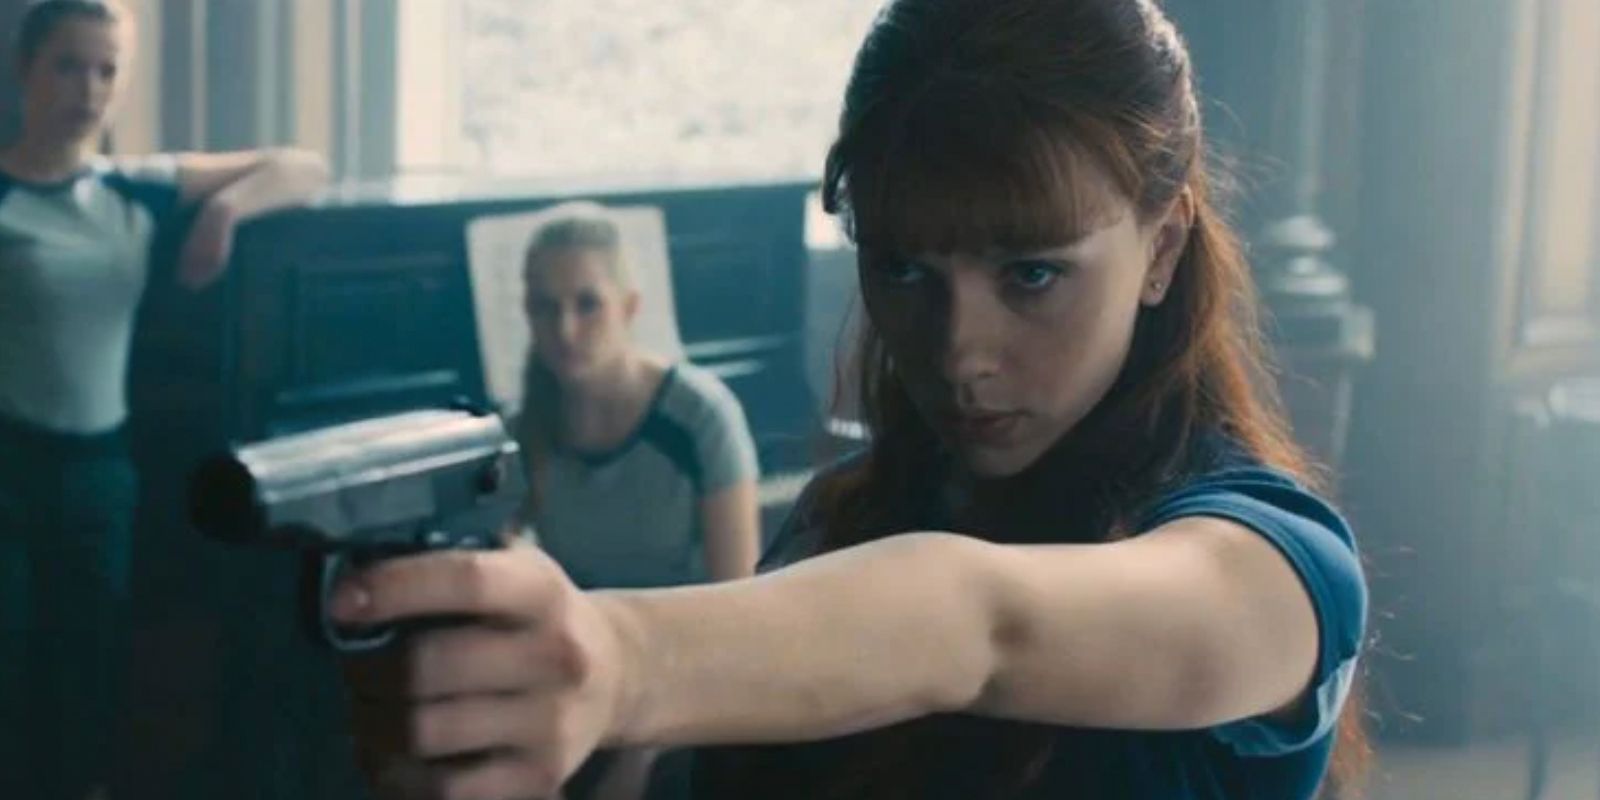 A young Natasha Romanoff takes aim in a Red Room training session flashback in Avengers Age Of Ultron